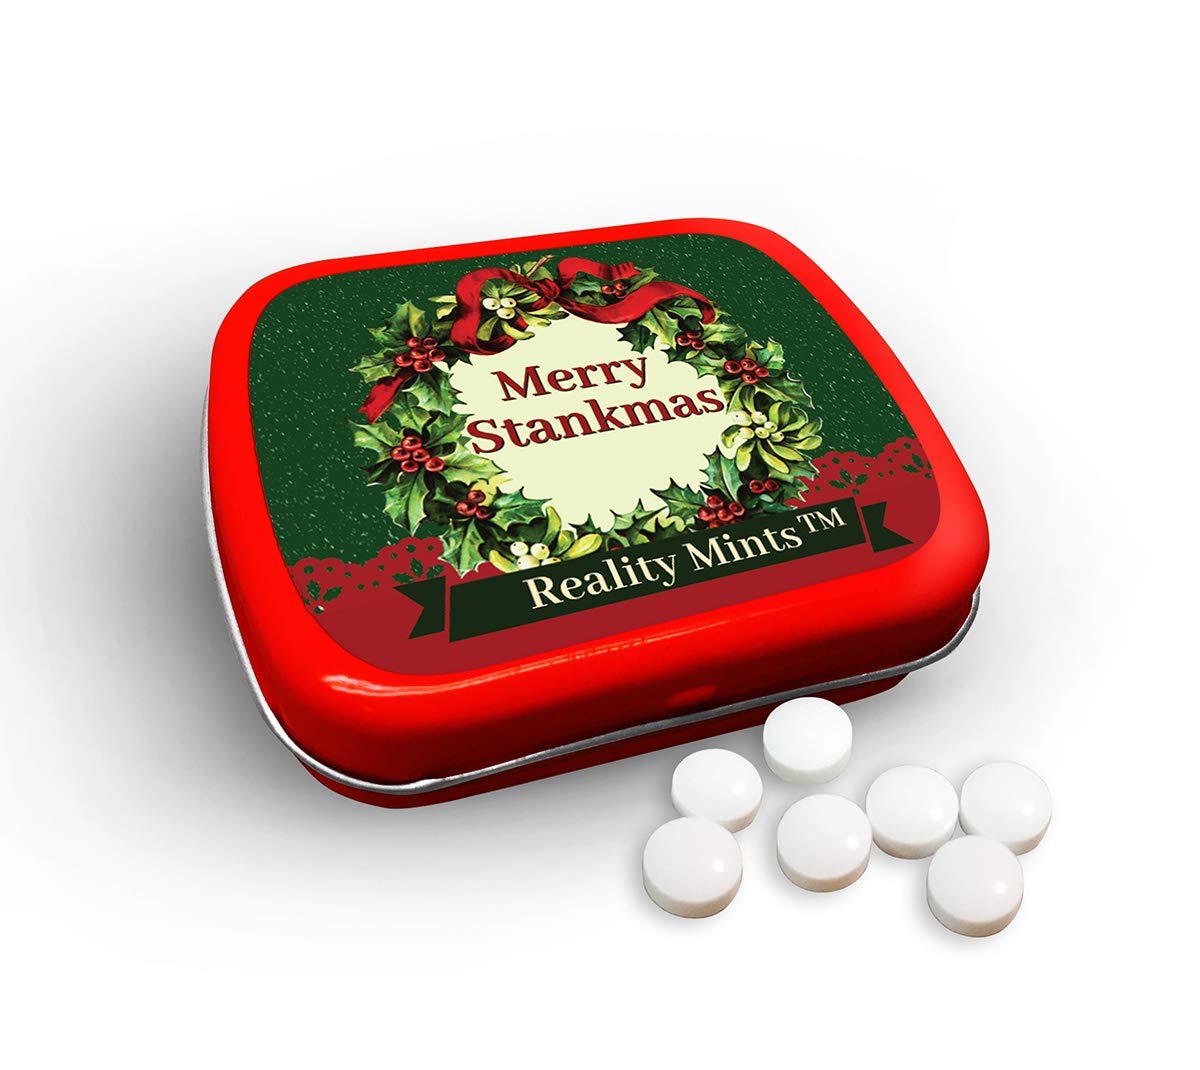 Merry Stankmas Mints - Funny Christmas Candy Stocking Stuffers - Peppermints - Funny Mints Tin - Stocking Stuffers for W